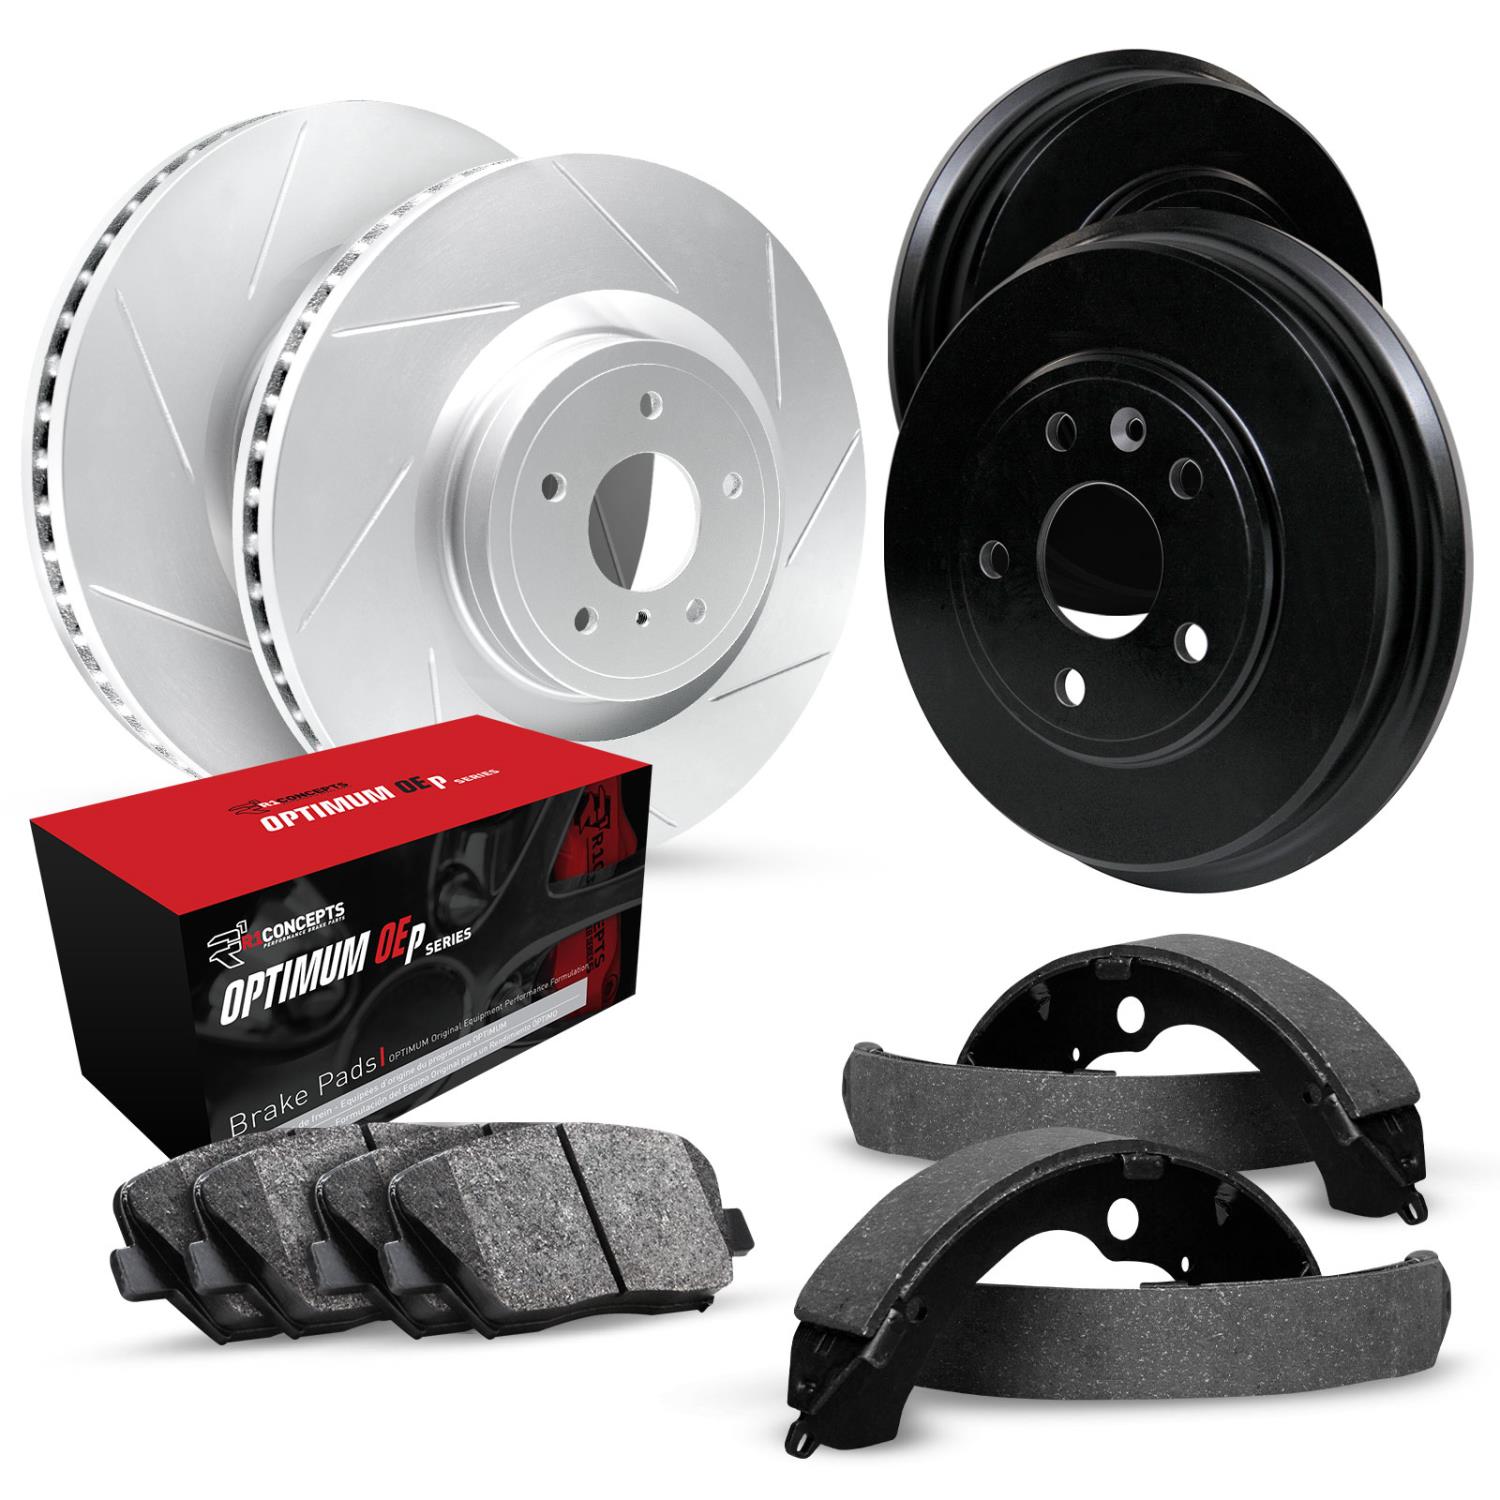 GEO-Carbon Slotted Brake Rotor & Drum Set w/Optimum OE Pads & Shoes, 2000-2003 GM, Position: Front & Rear